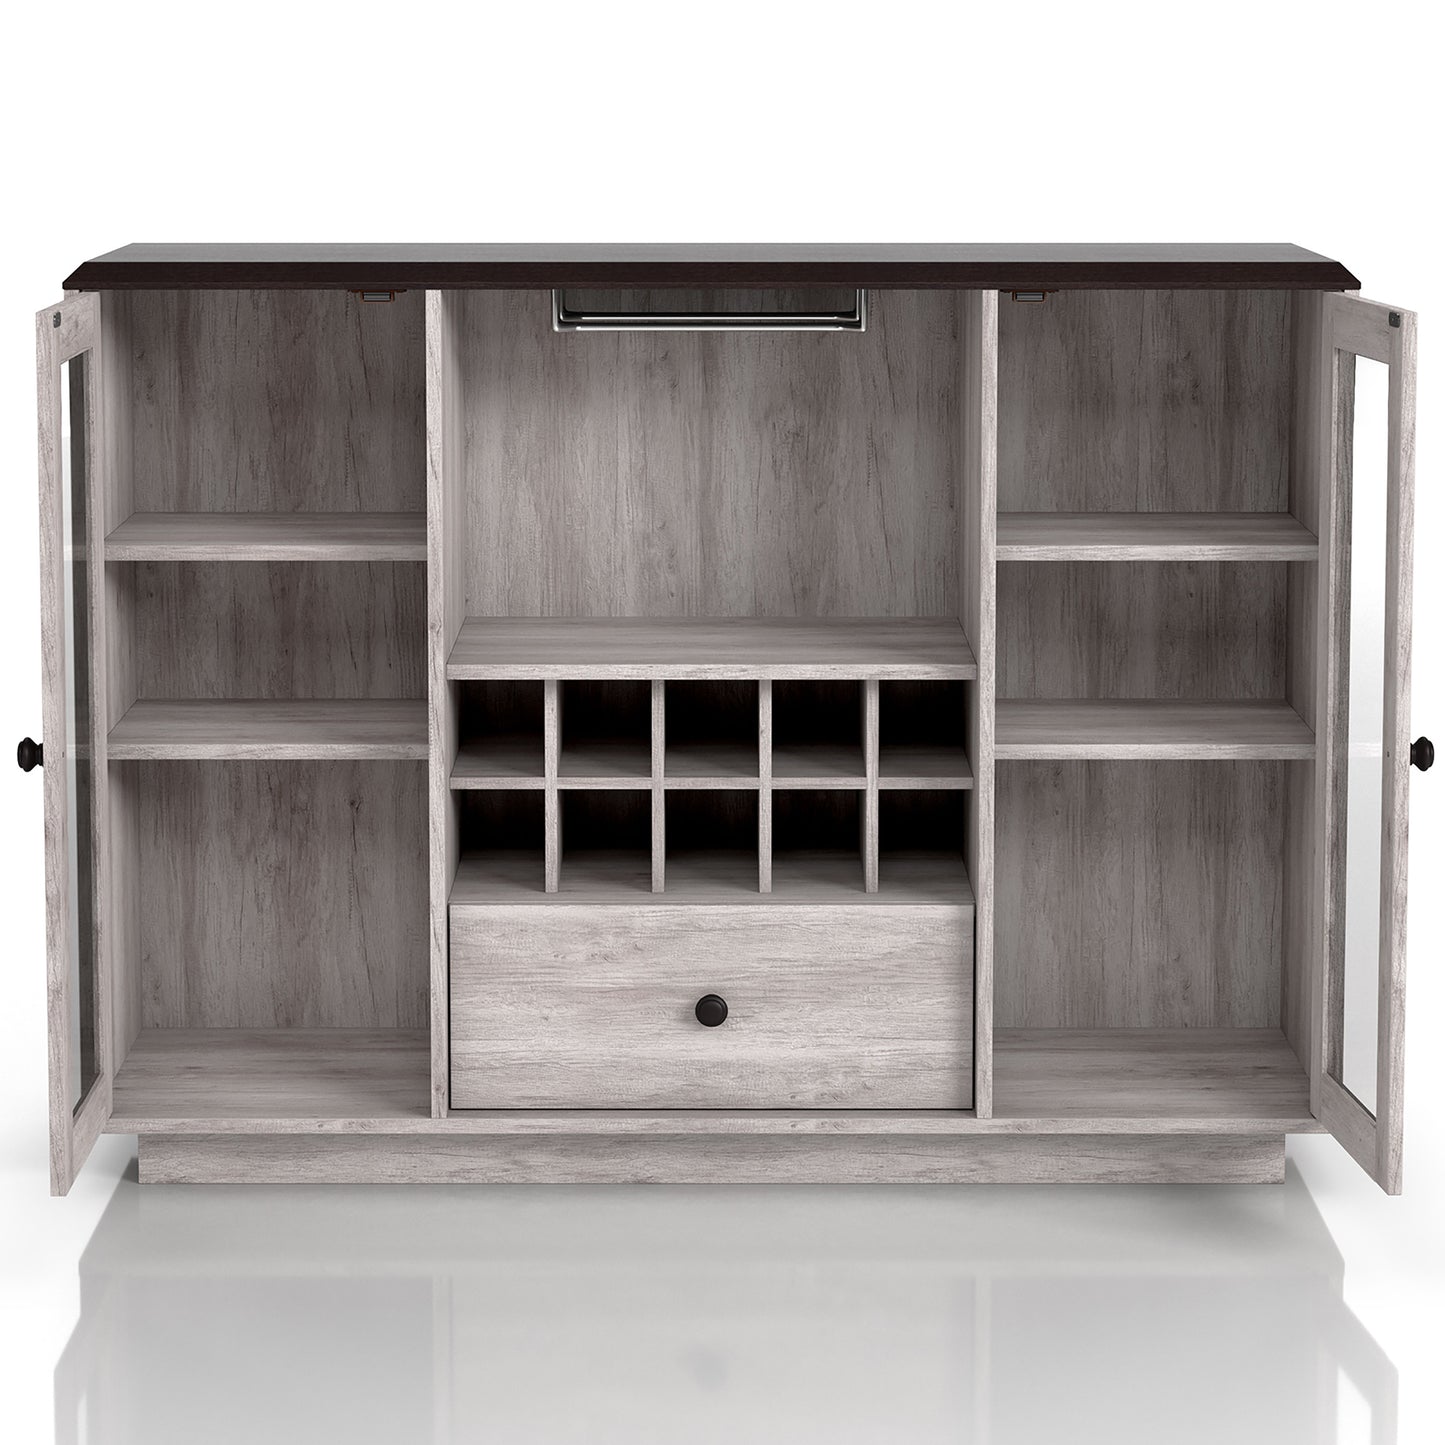 Front-facing transitional coastal white six-shelf 10-bottle wine cabinet with glass doors open on a white background